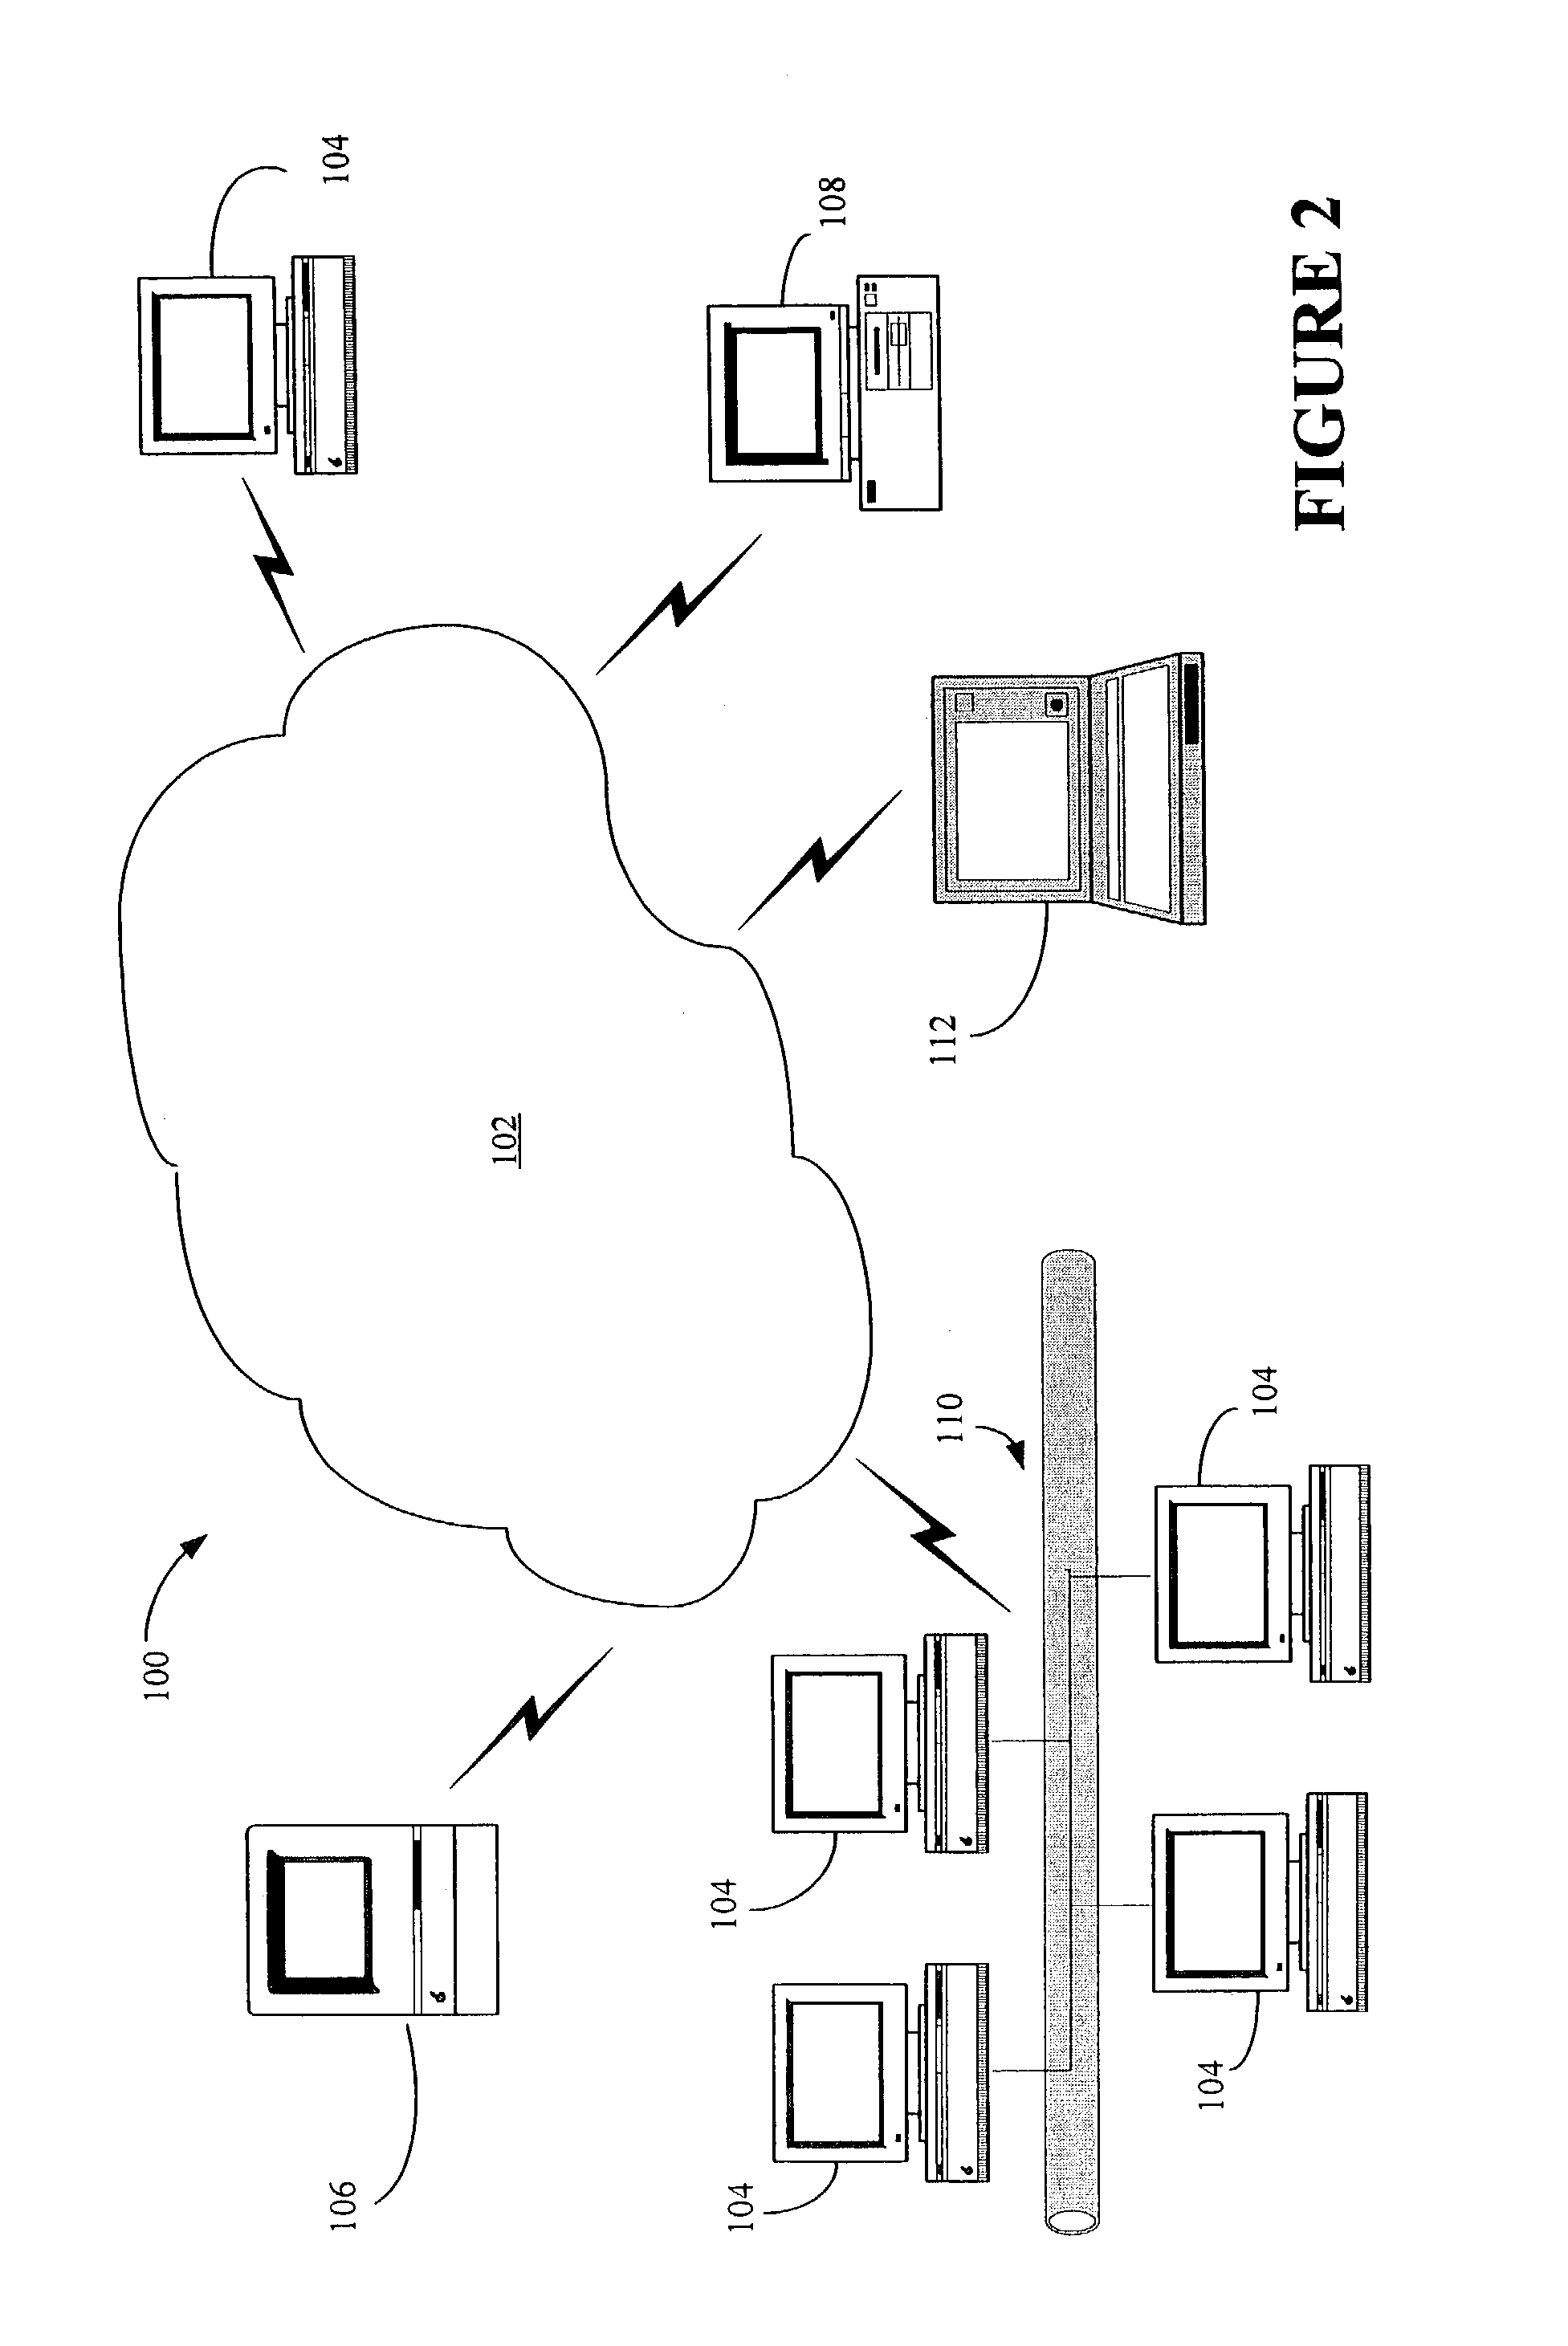 Method and apparatus for displaying information during an instant messaging session